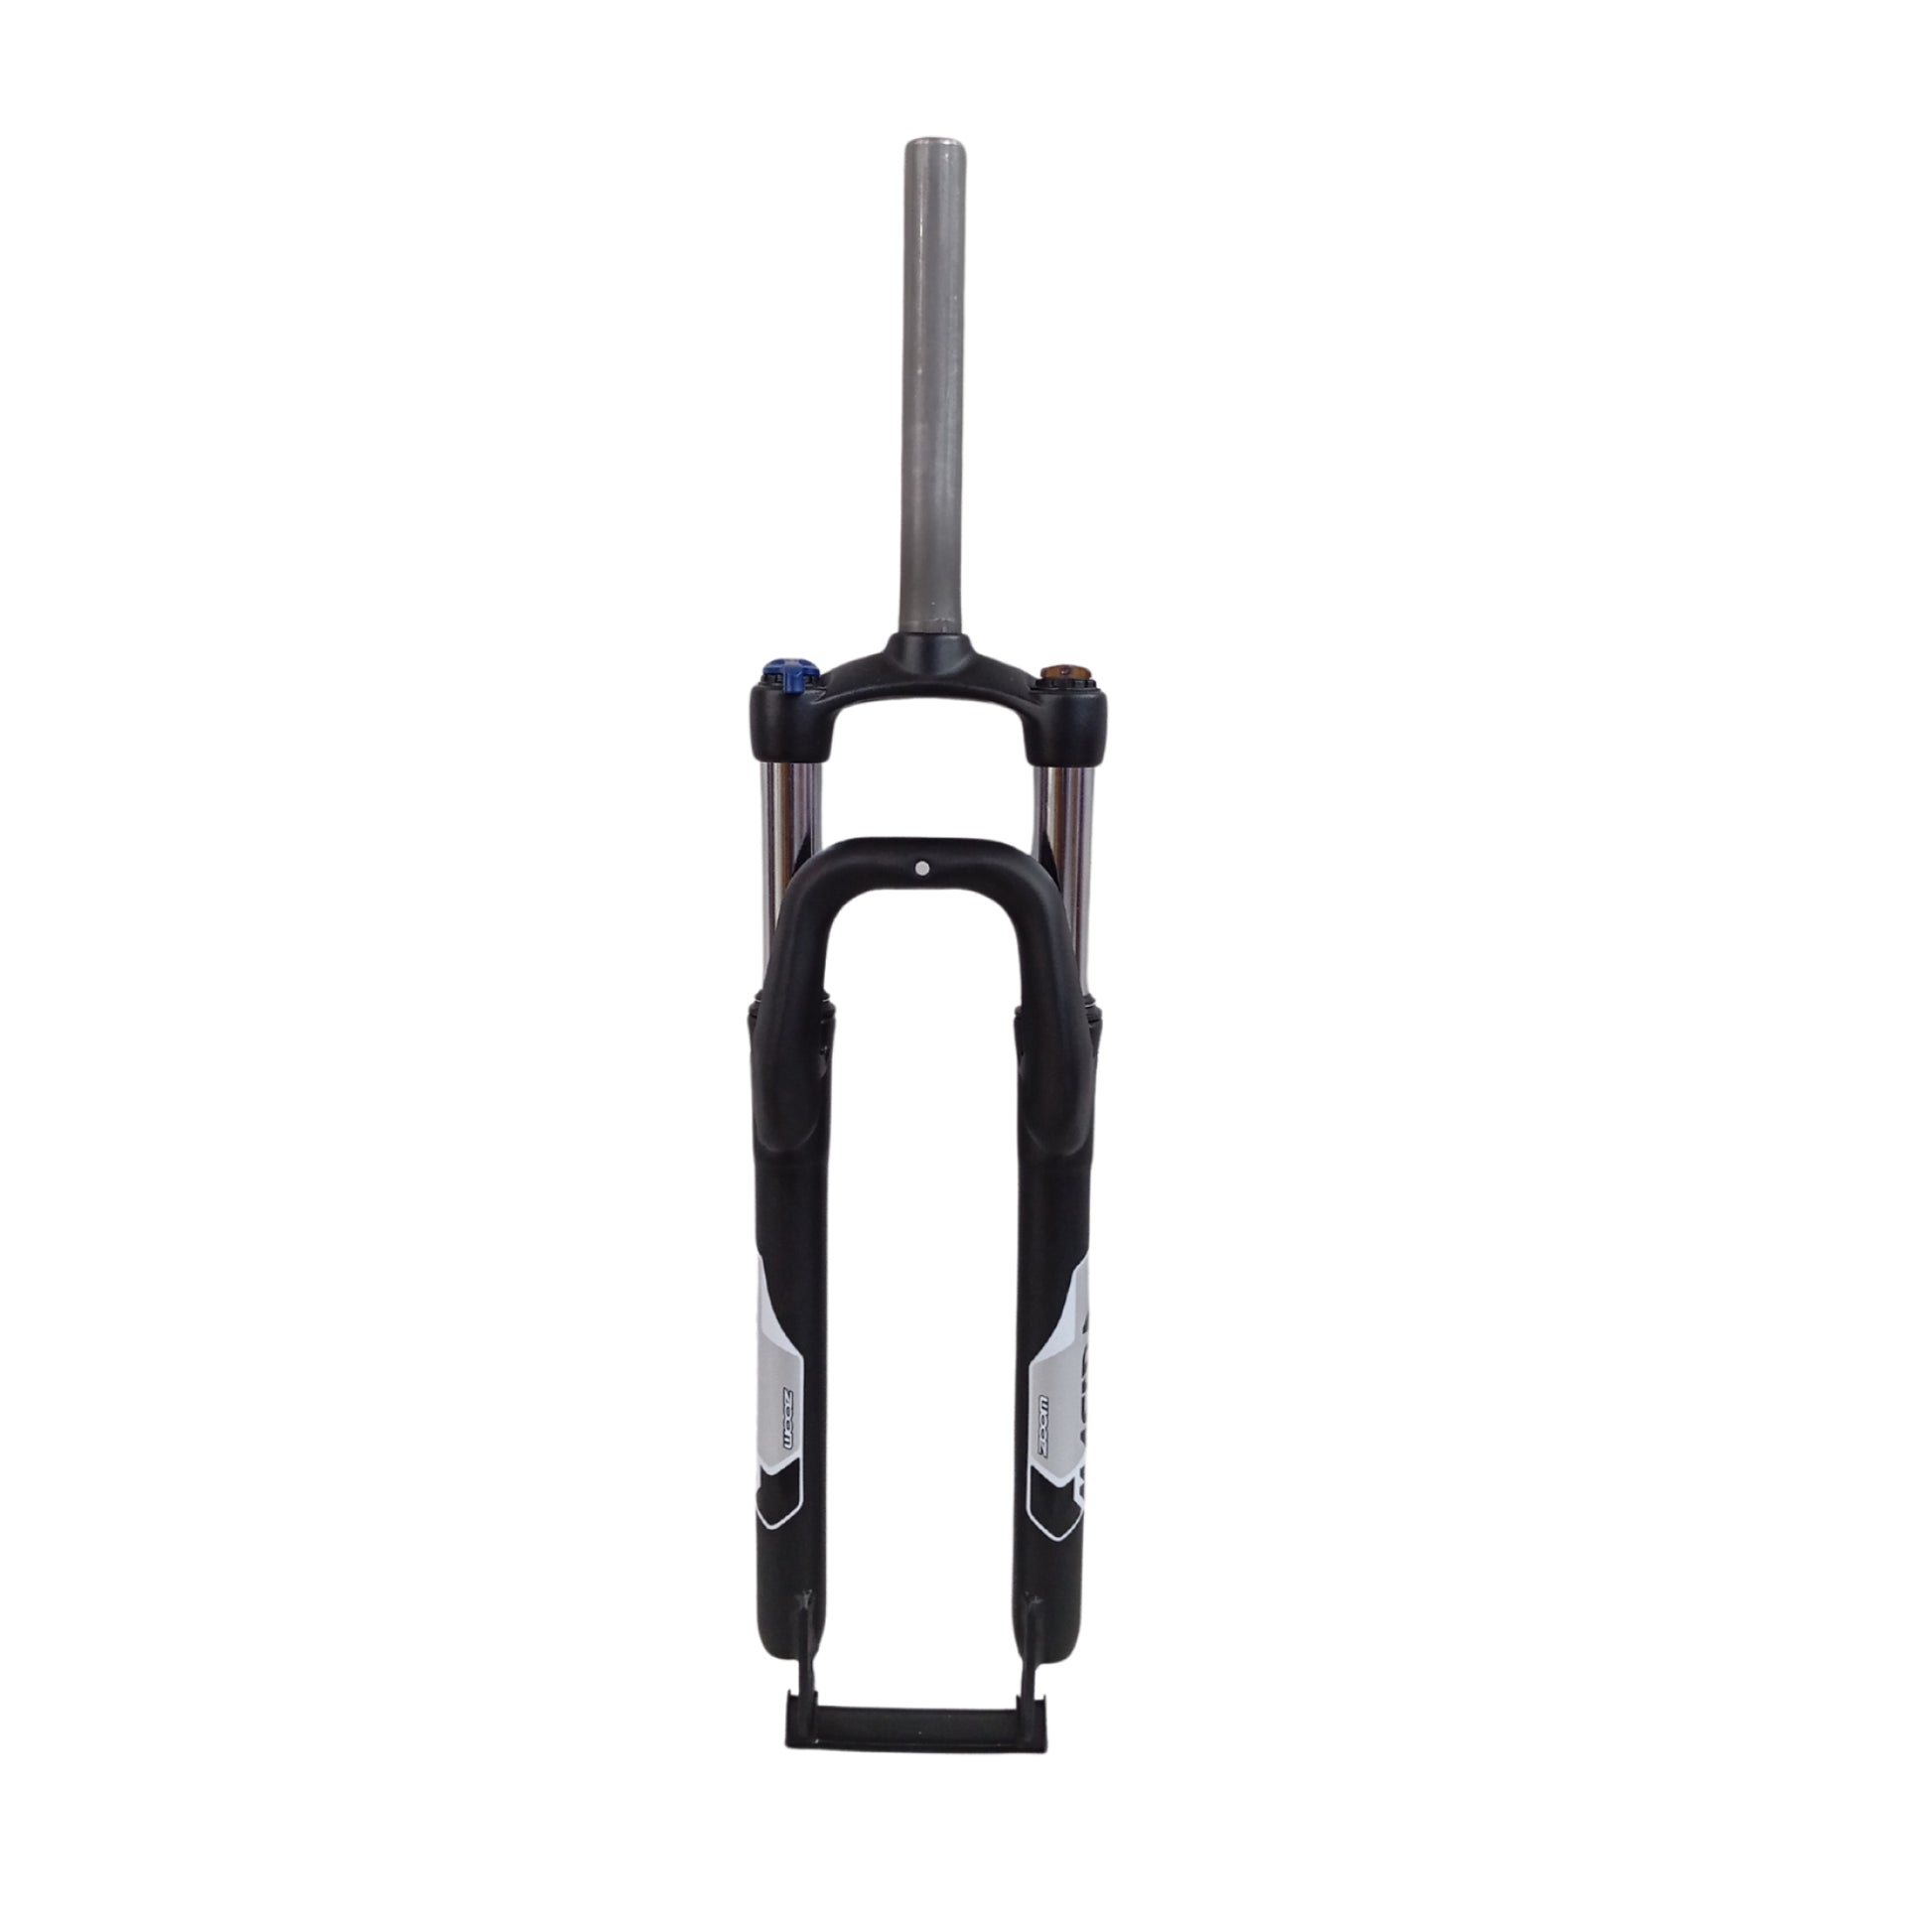 Bicycle Lockout Suspension Fork Zoom 389a (Masera) with 80 mm travel and mechanical lockout ,preload